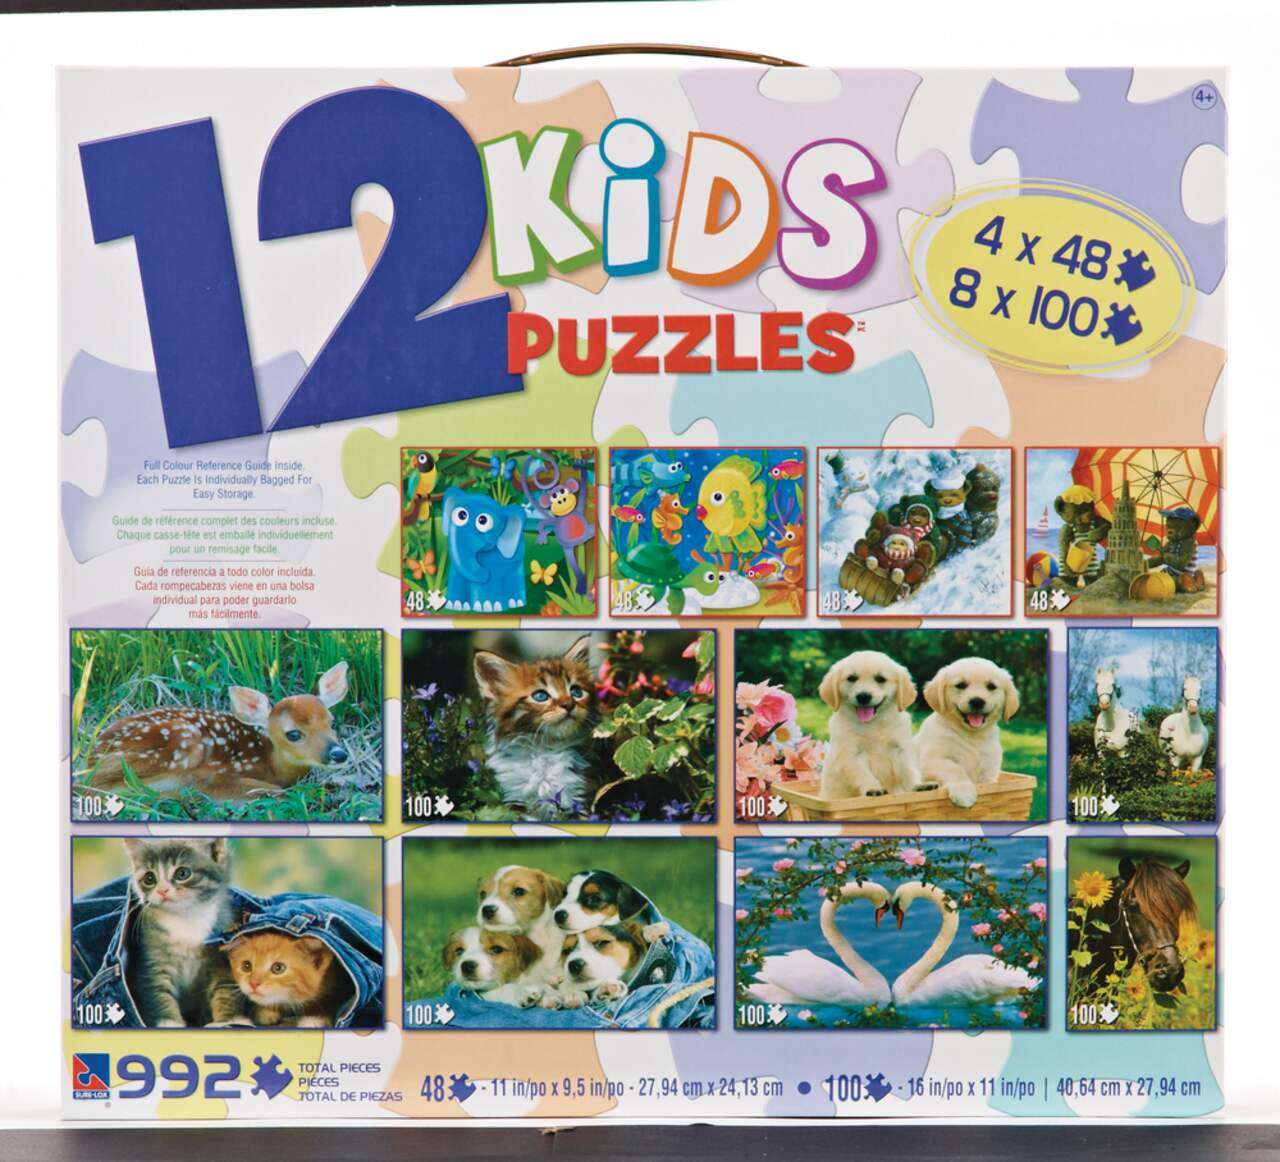 https://media-www.canadiantire.ca/product/seasonal-gardening/toys/toys-games/0501571/12-in-1-kids-puzzle-asst-529e0873-87c9-432e-b9f7-abd16bb7faed.png?imdensity=1&imwidth=640&impolicy=mZoom